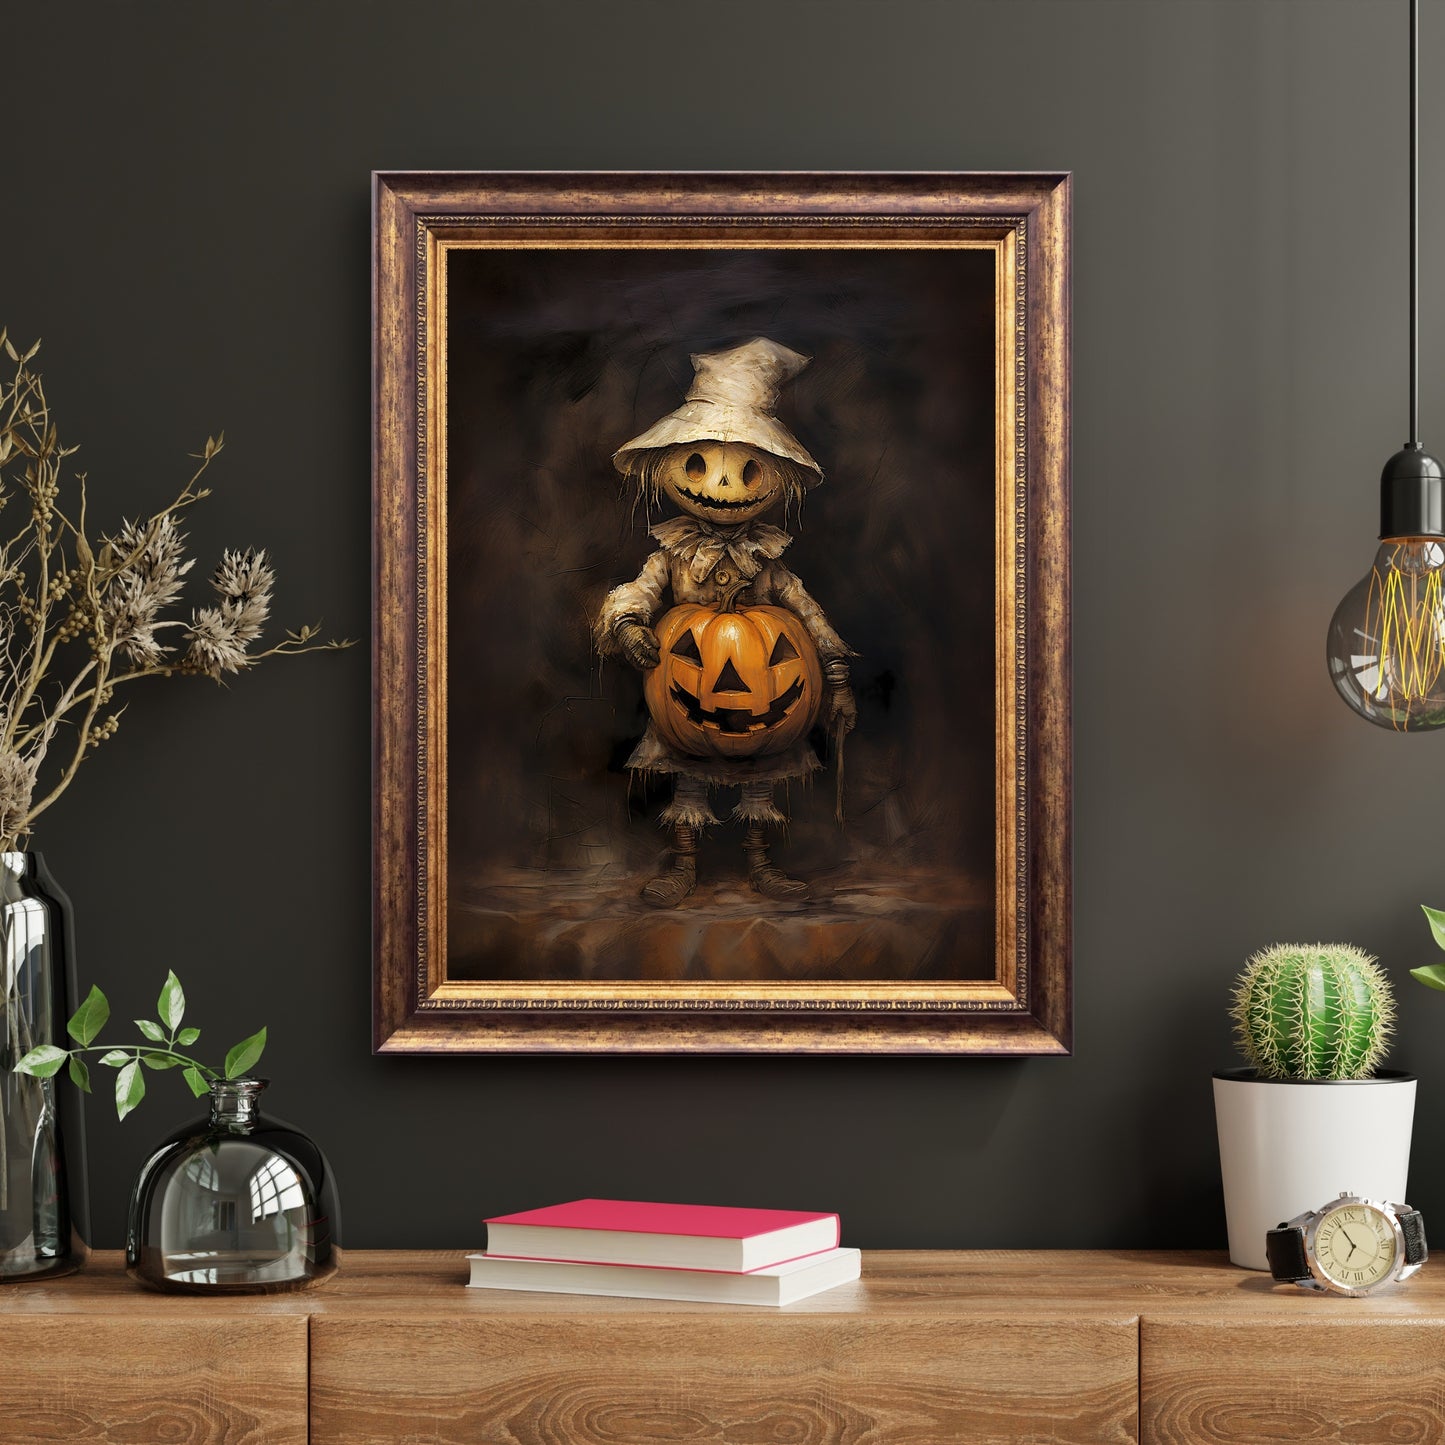 Scarecrow with Pumpkin Halloween Wall Art Vintage Oil Painting Spooky Decor Dark Cottagecore Gothic Poster Dark Academia Art Paper Poster Print